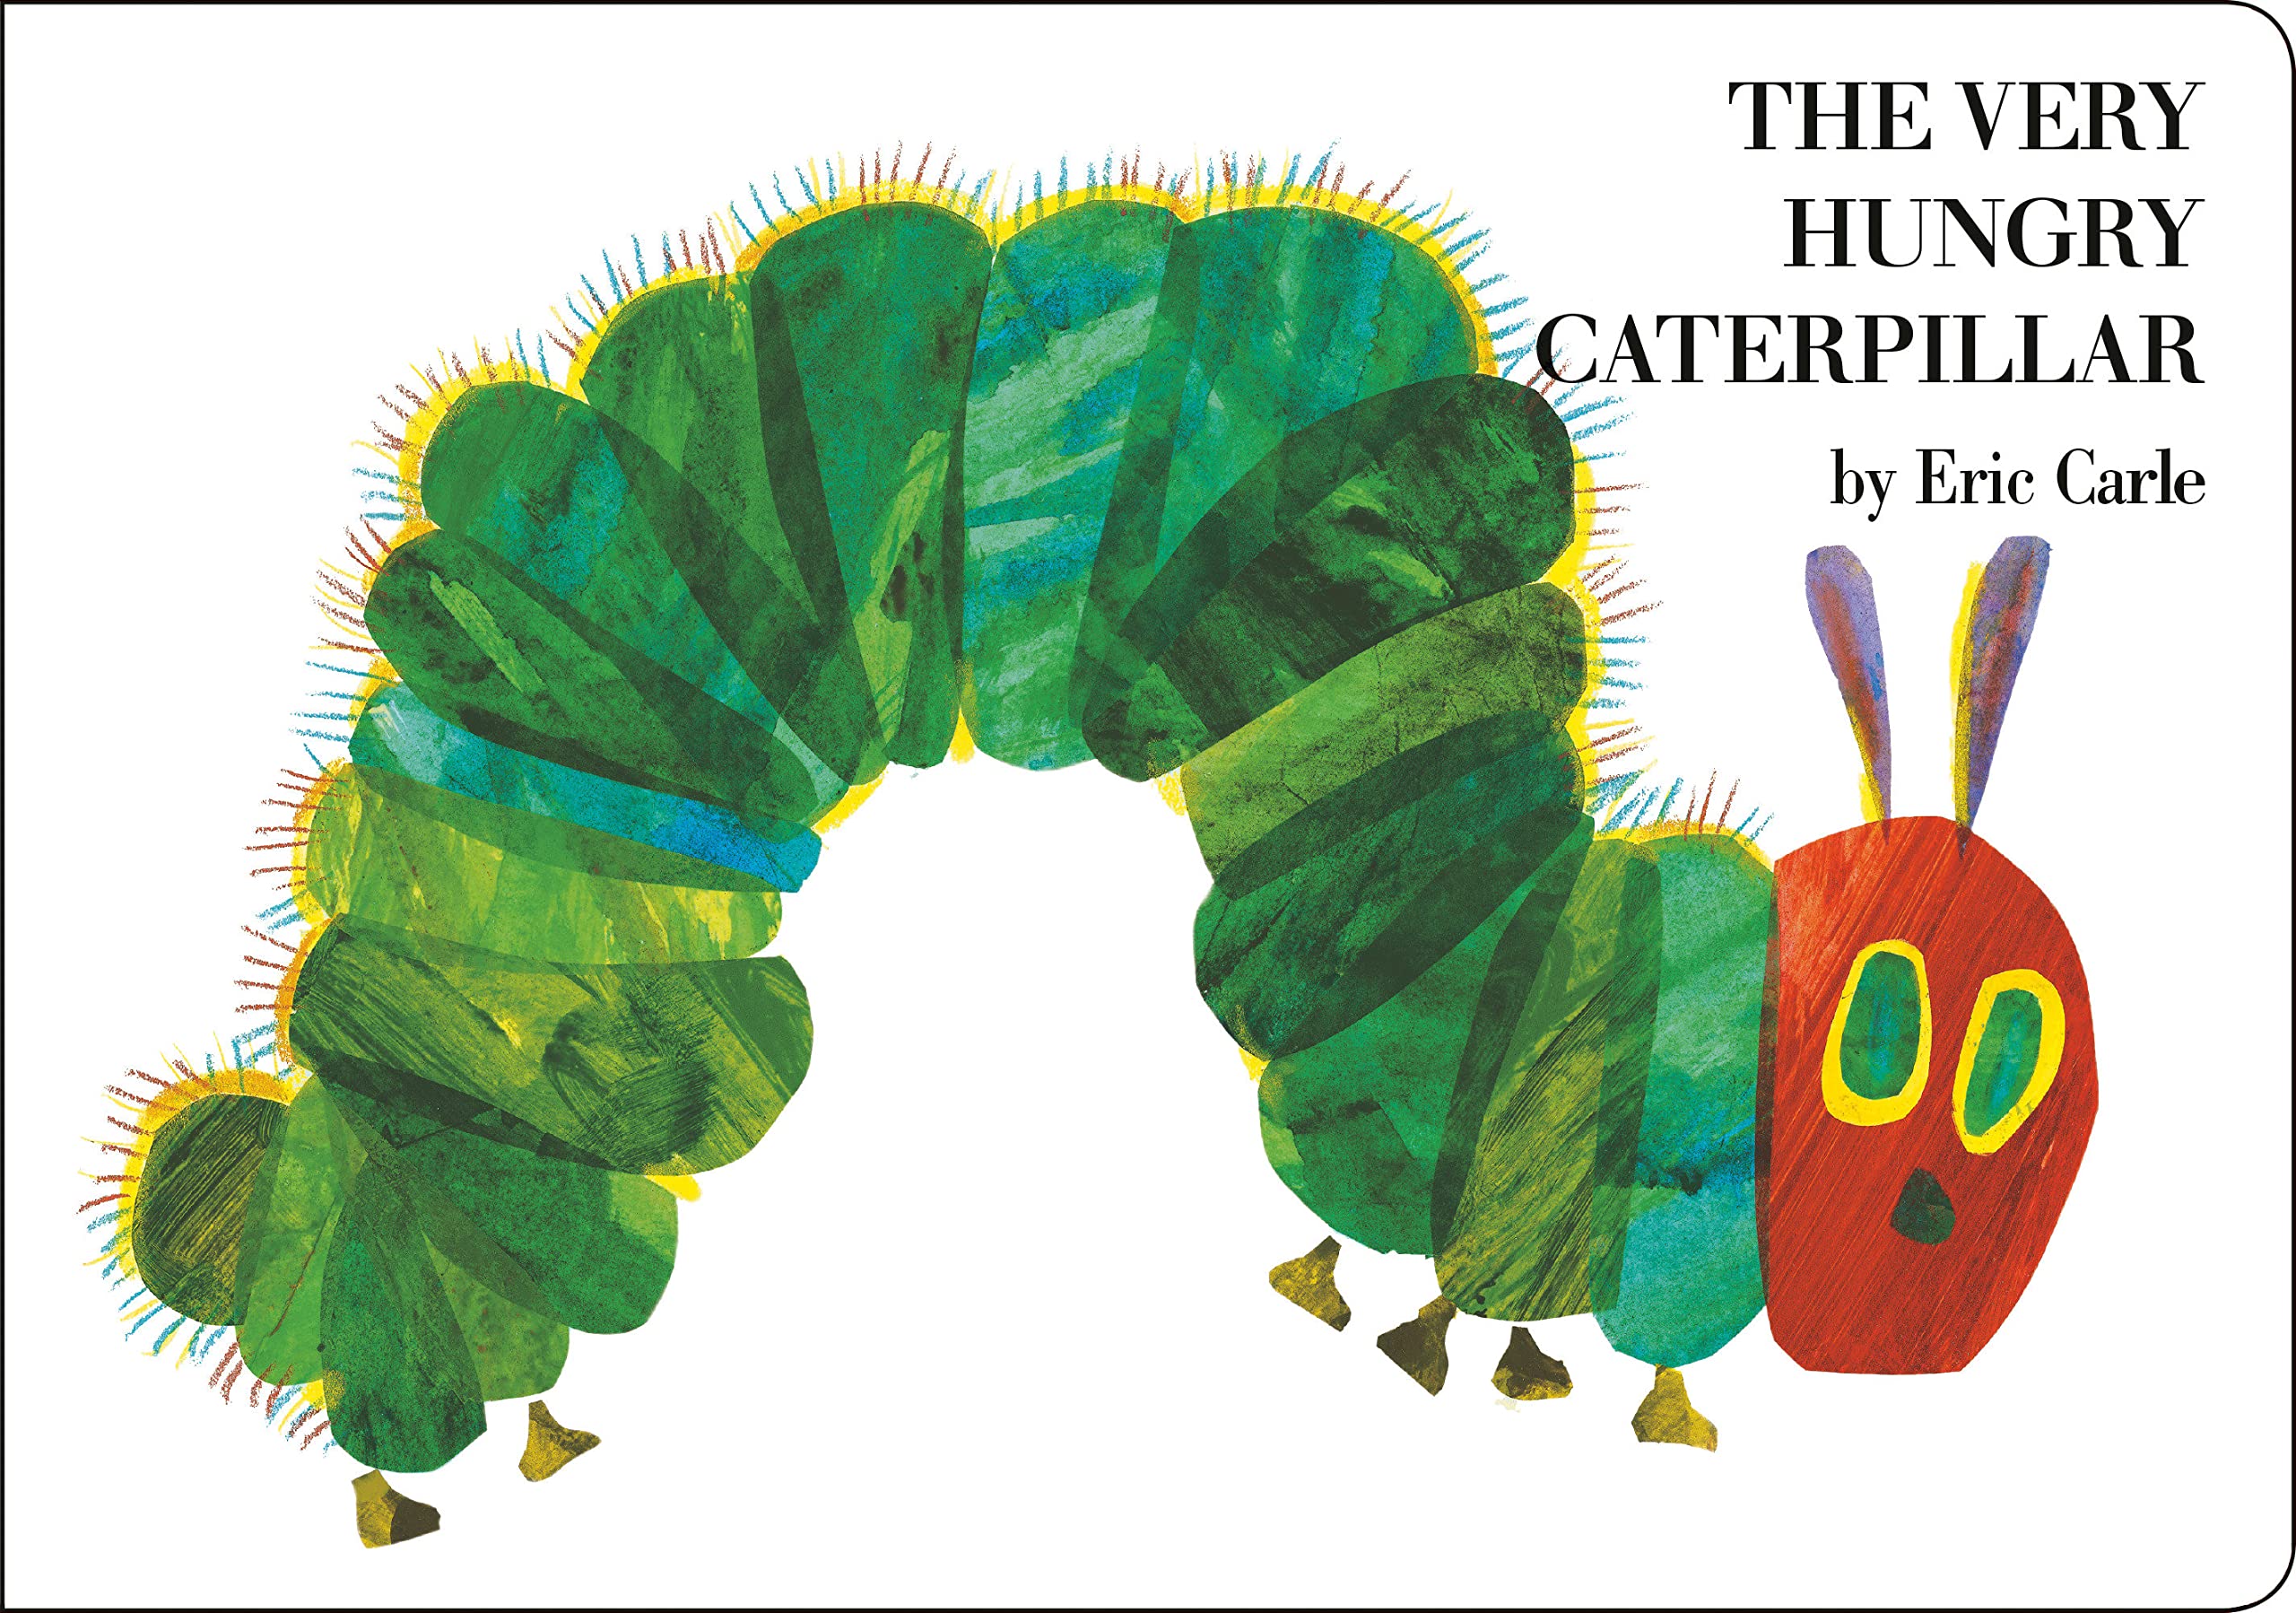 The Very Hungry Caterpillar" by Eric Carle